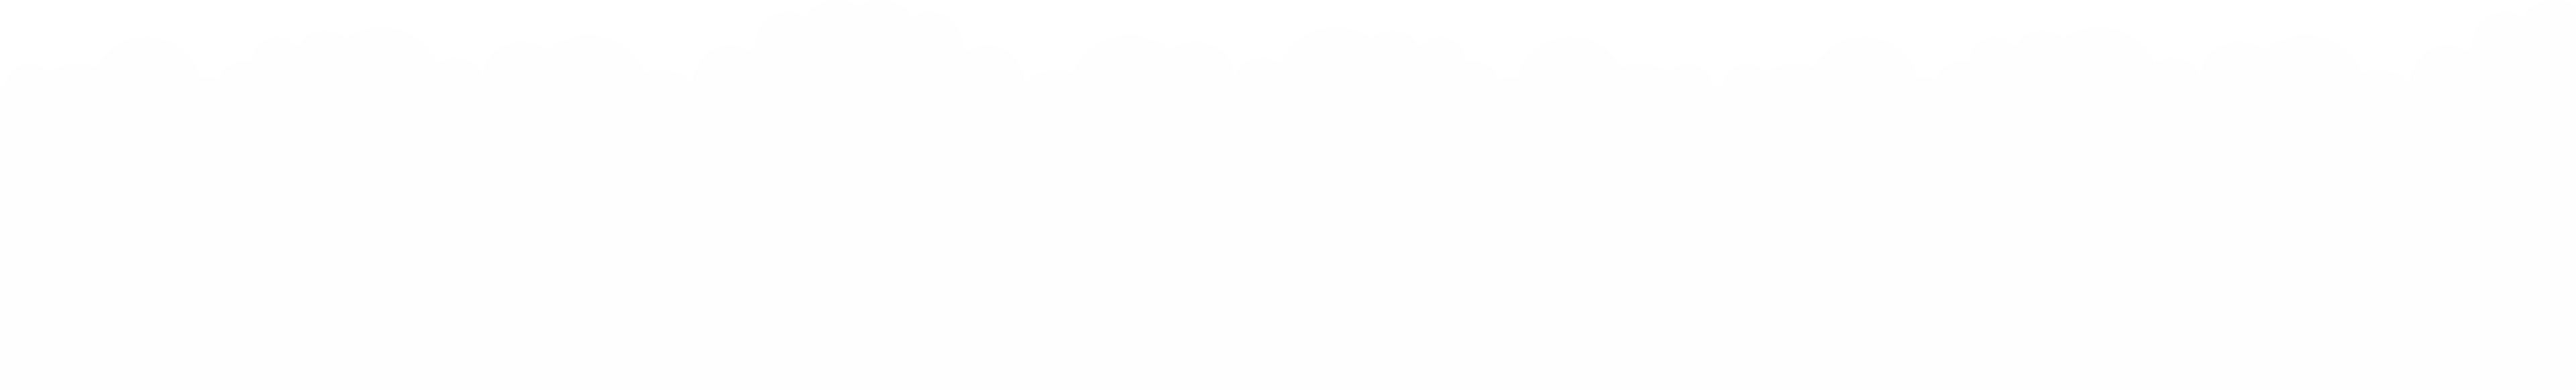 Cloud Background Layer 2